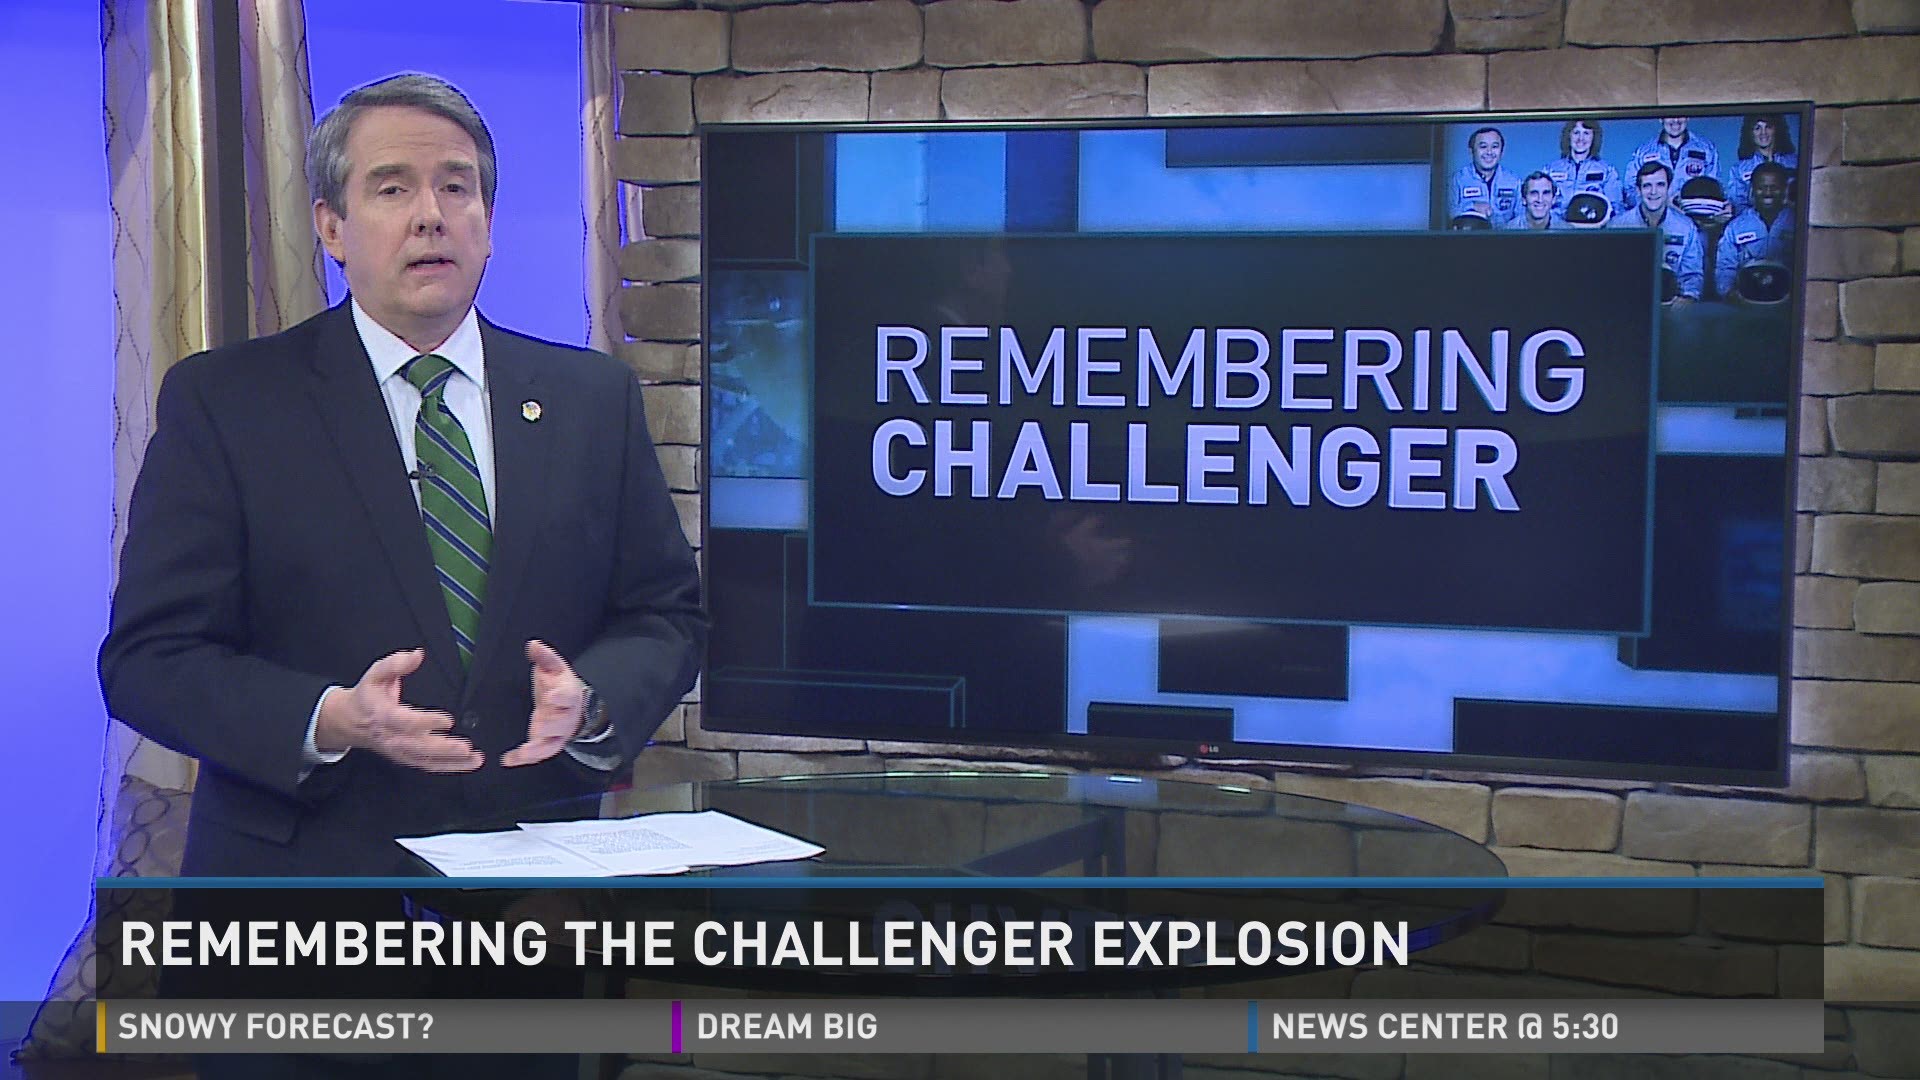 Three decades since Challenger explodes with NEWS CENTER on site.